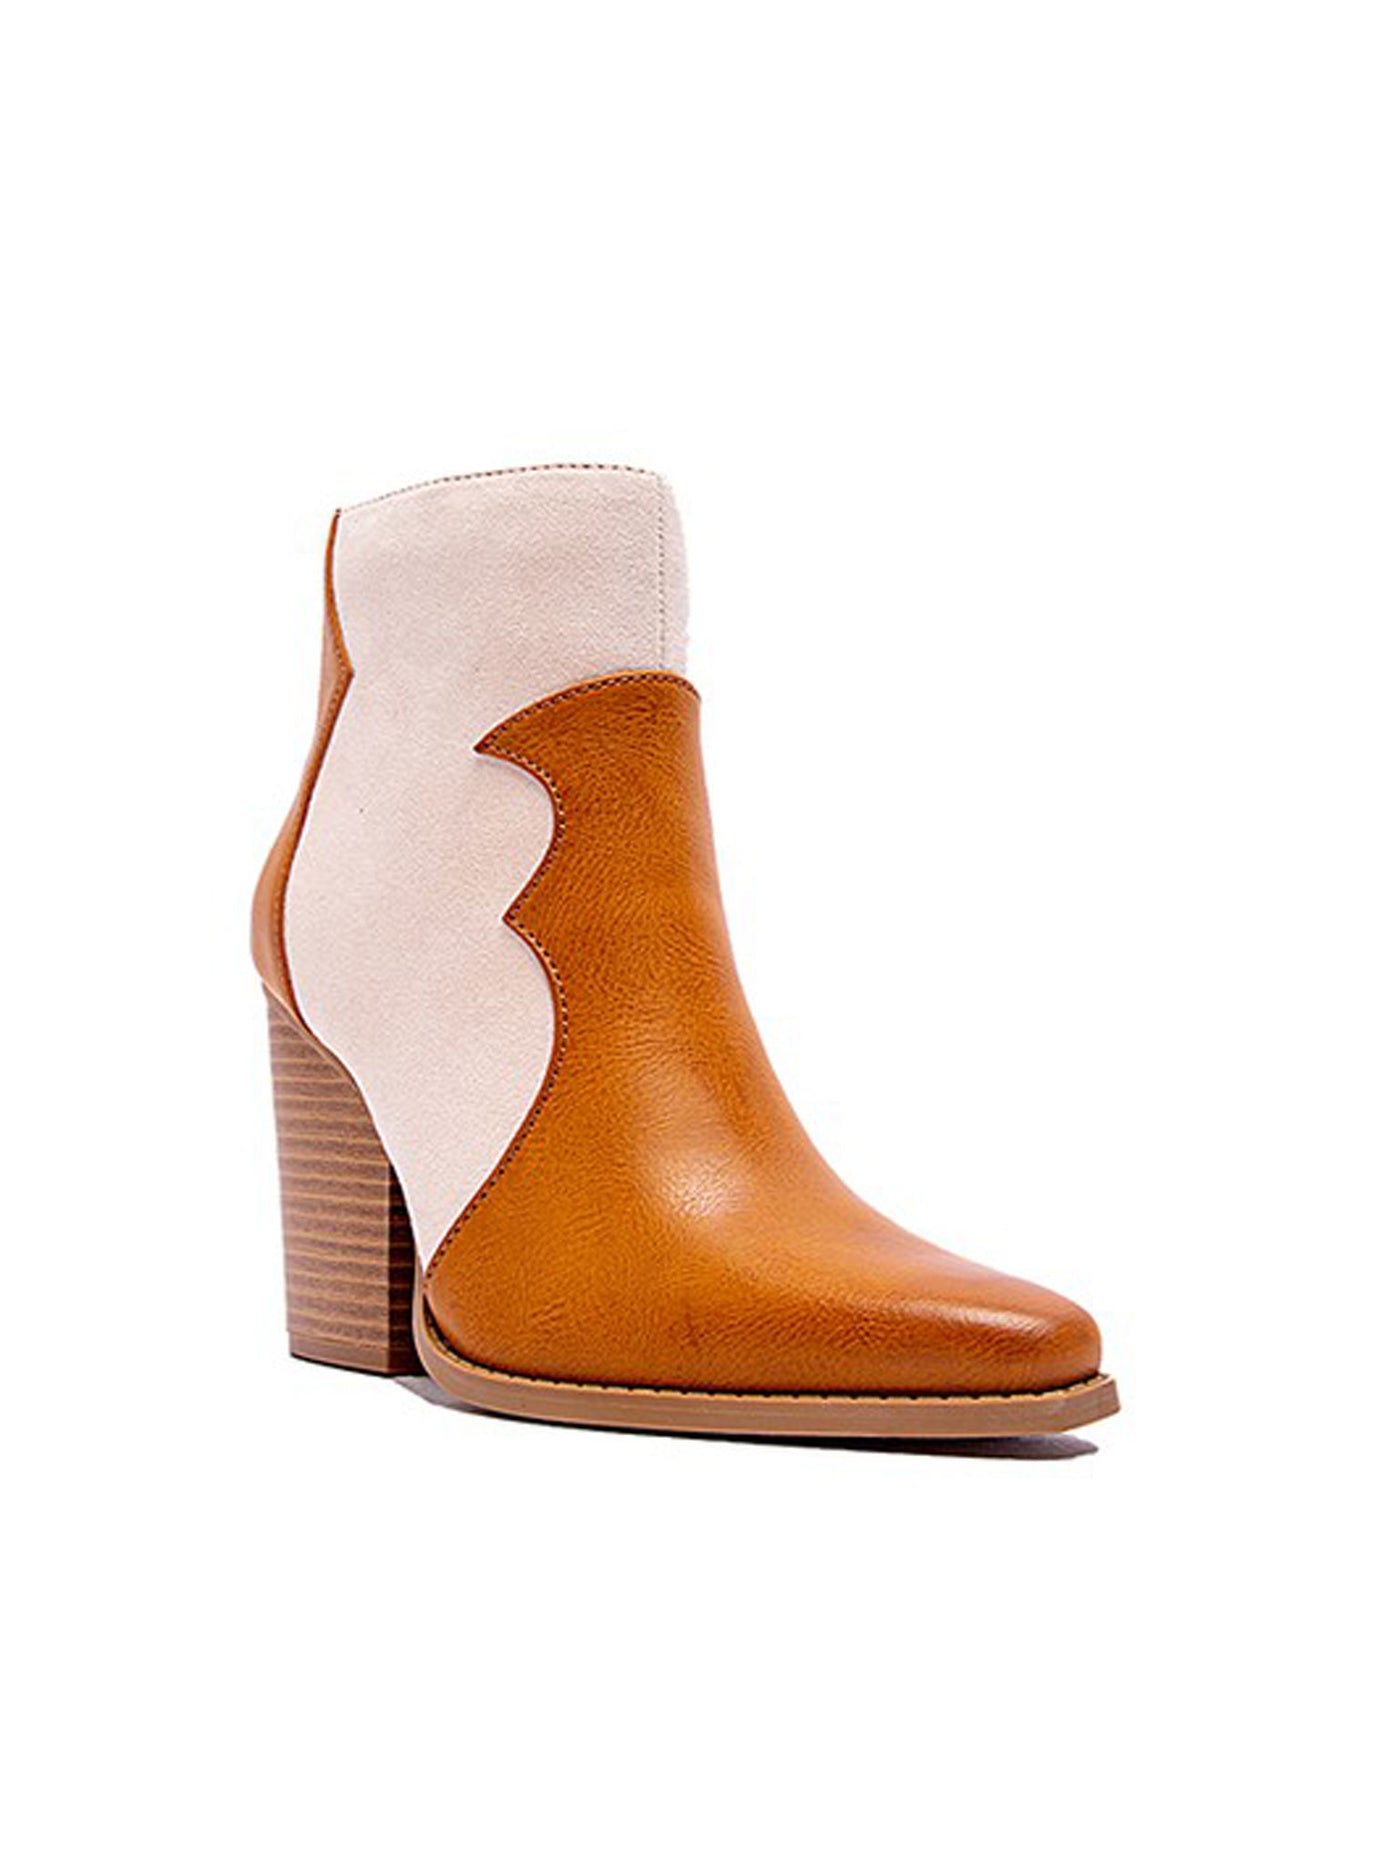 Ramble On Camel Ankle Bootie